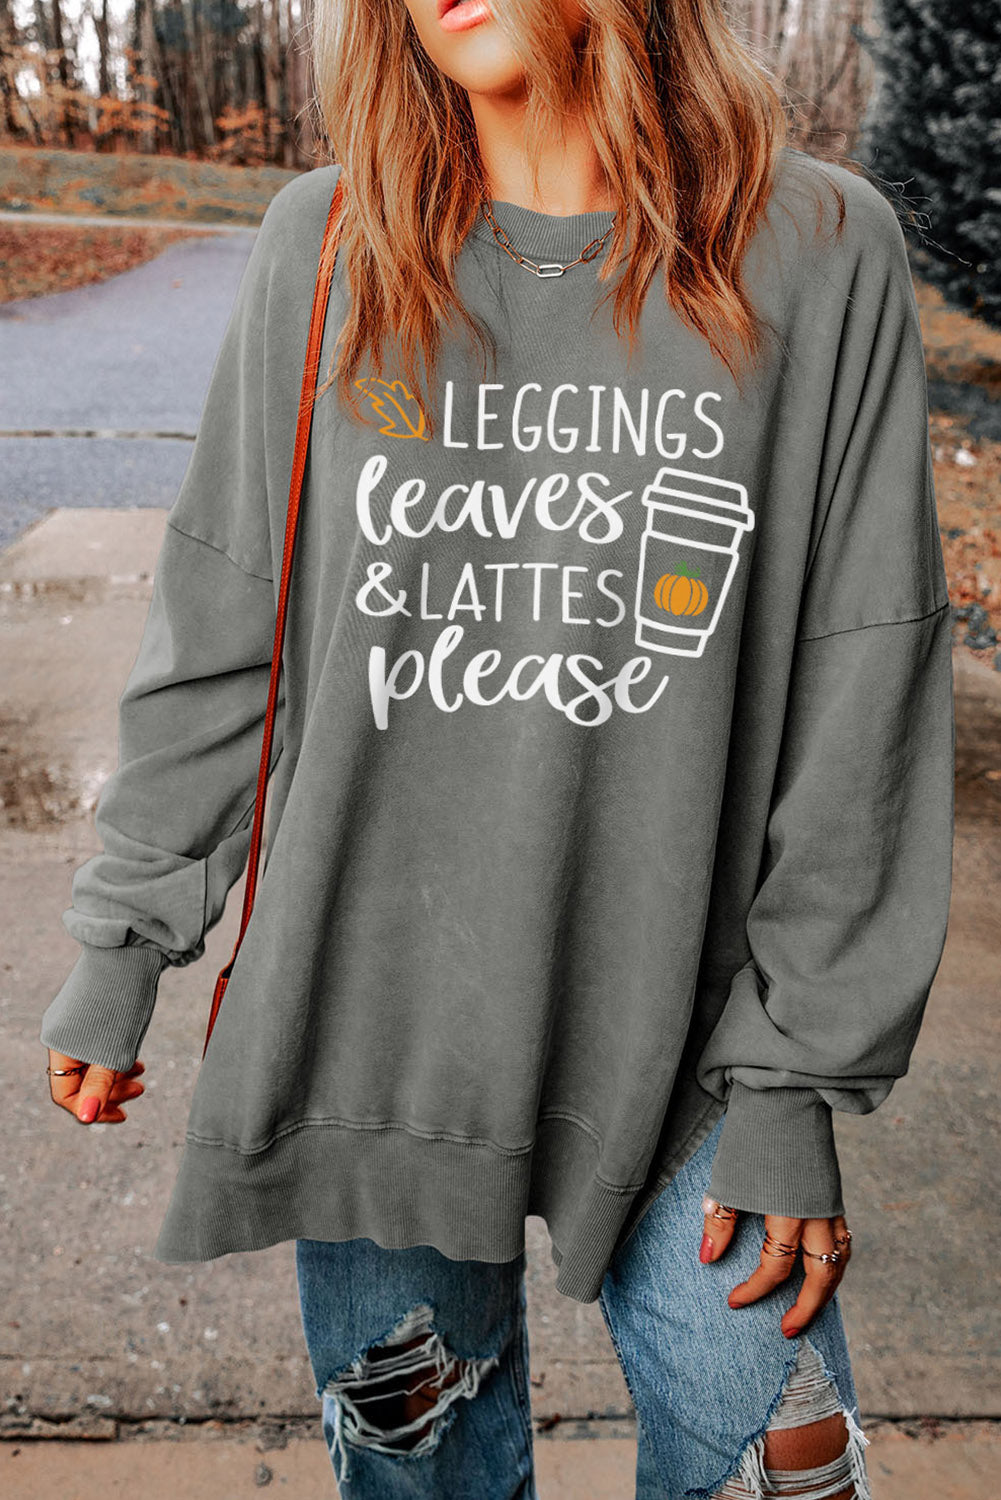 Round Neck Dropped Shoulder LEGGINGS LEAVES LATTES PLEASE Graphic Sweatshirt - Green / S - T-Shirts - Shirts & Tops - 1